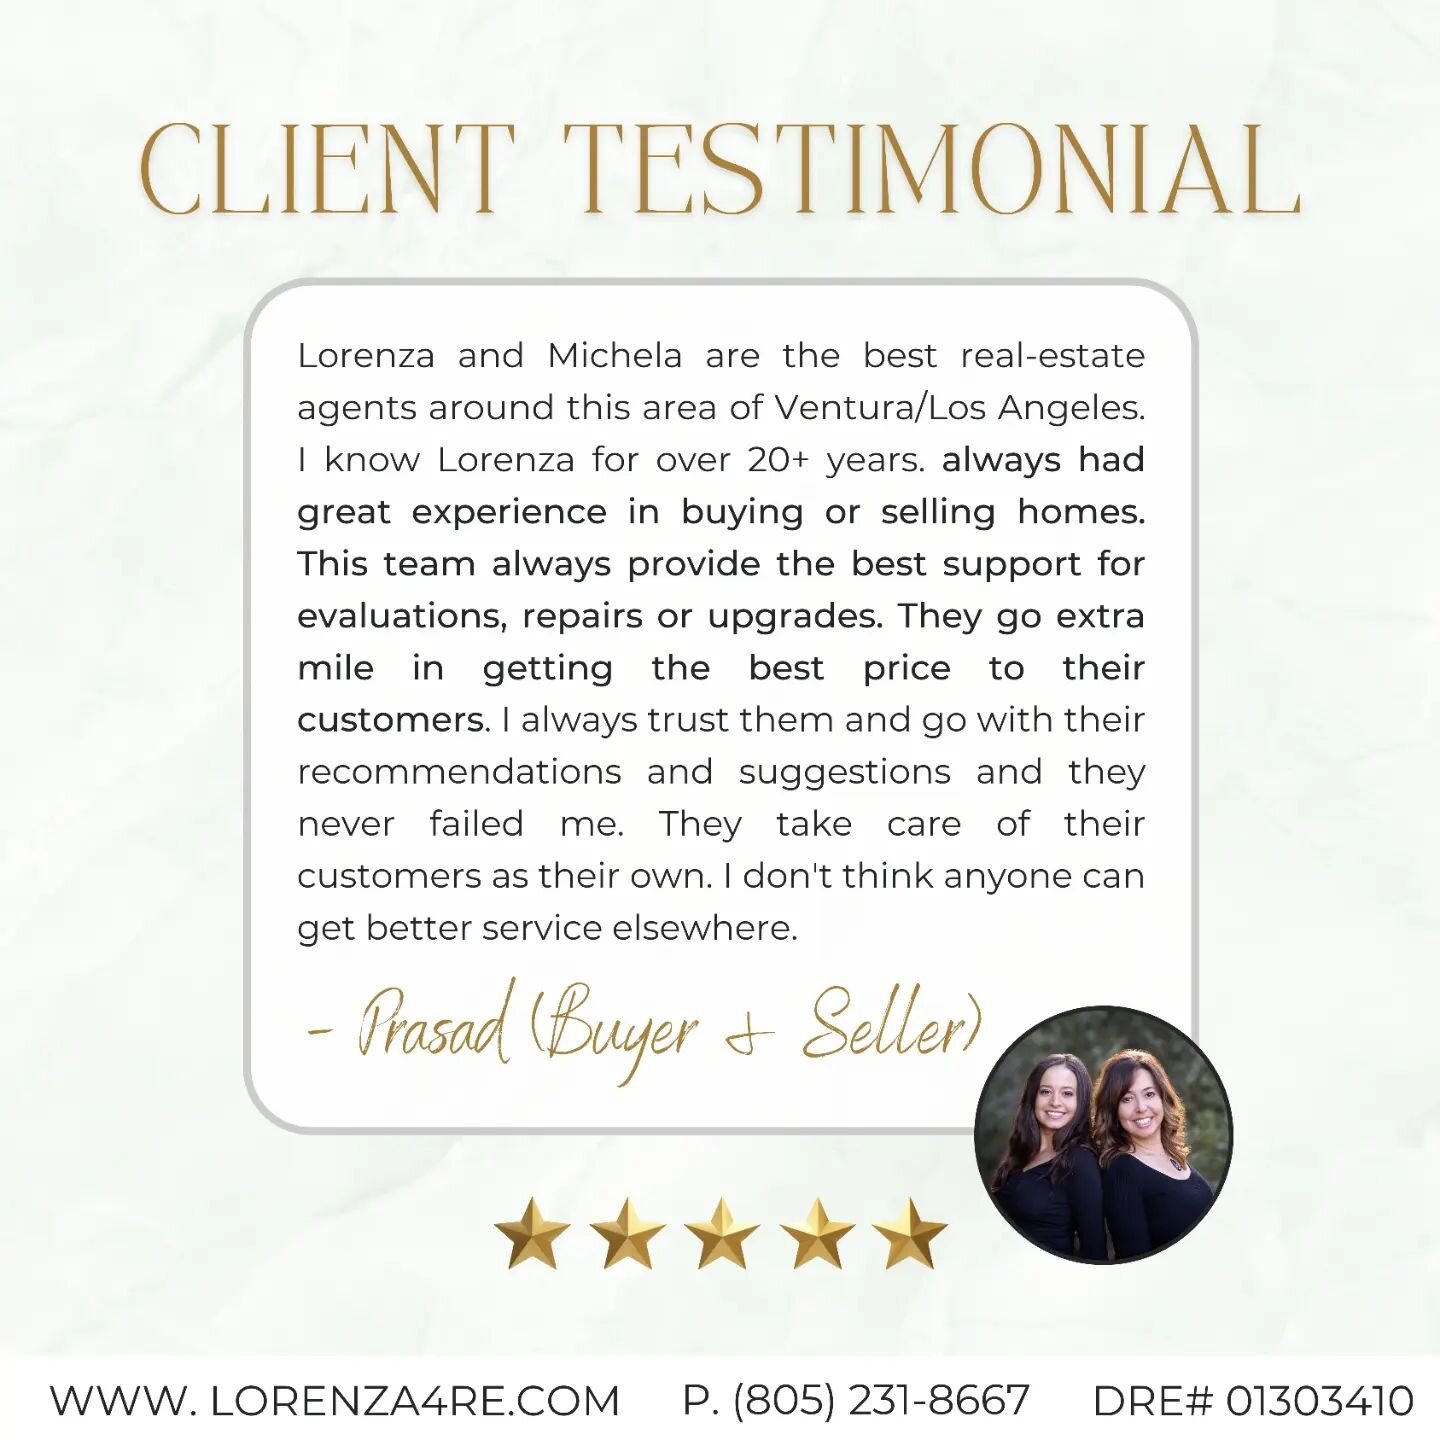 ✨ Testimonial Tuesday! ✨

We are grateful to our incredible client for his kind words and outstanding reviews! It has been an absolute pleasure working with you in both selling your previous home and guiding you through the process of finding your dr